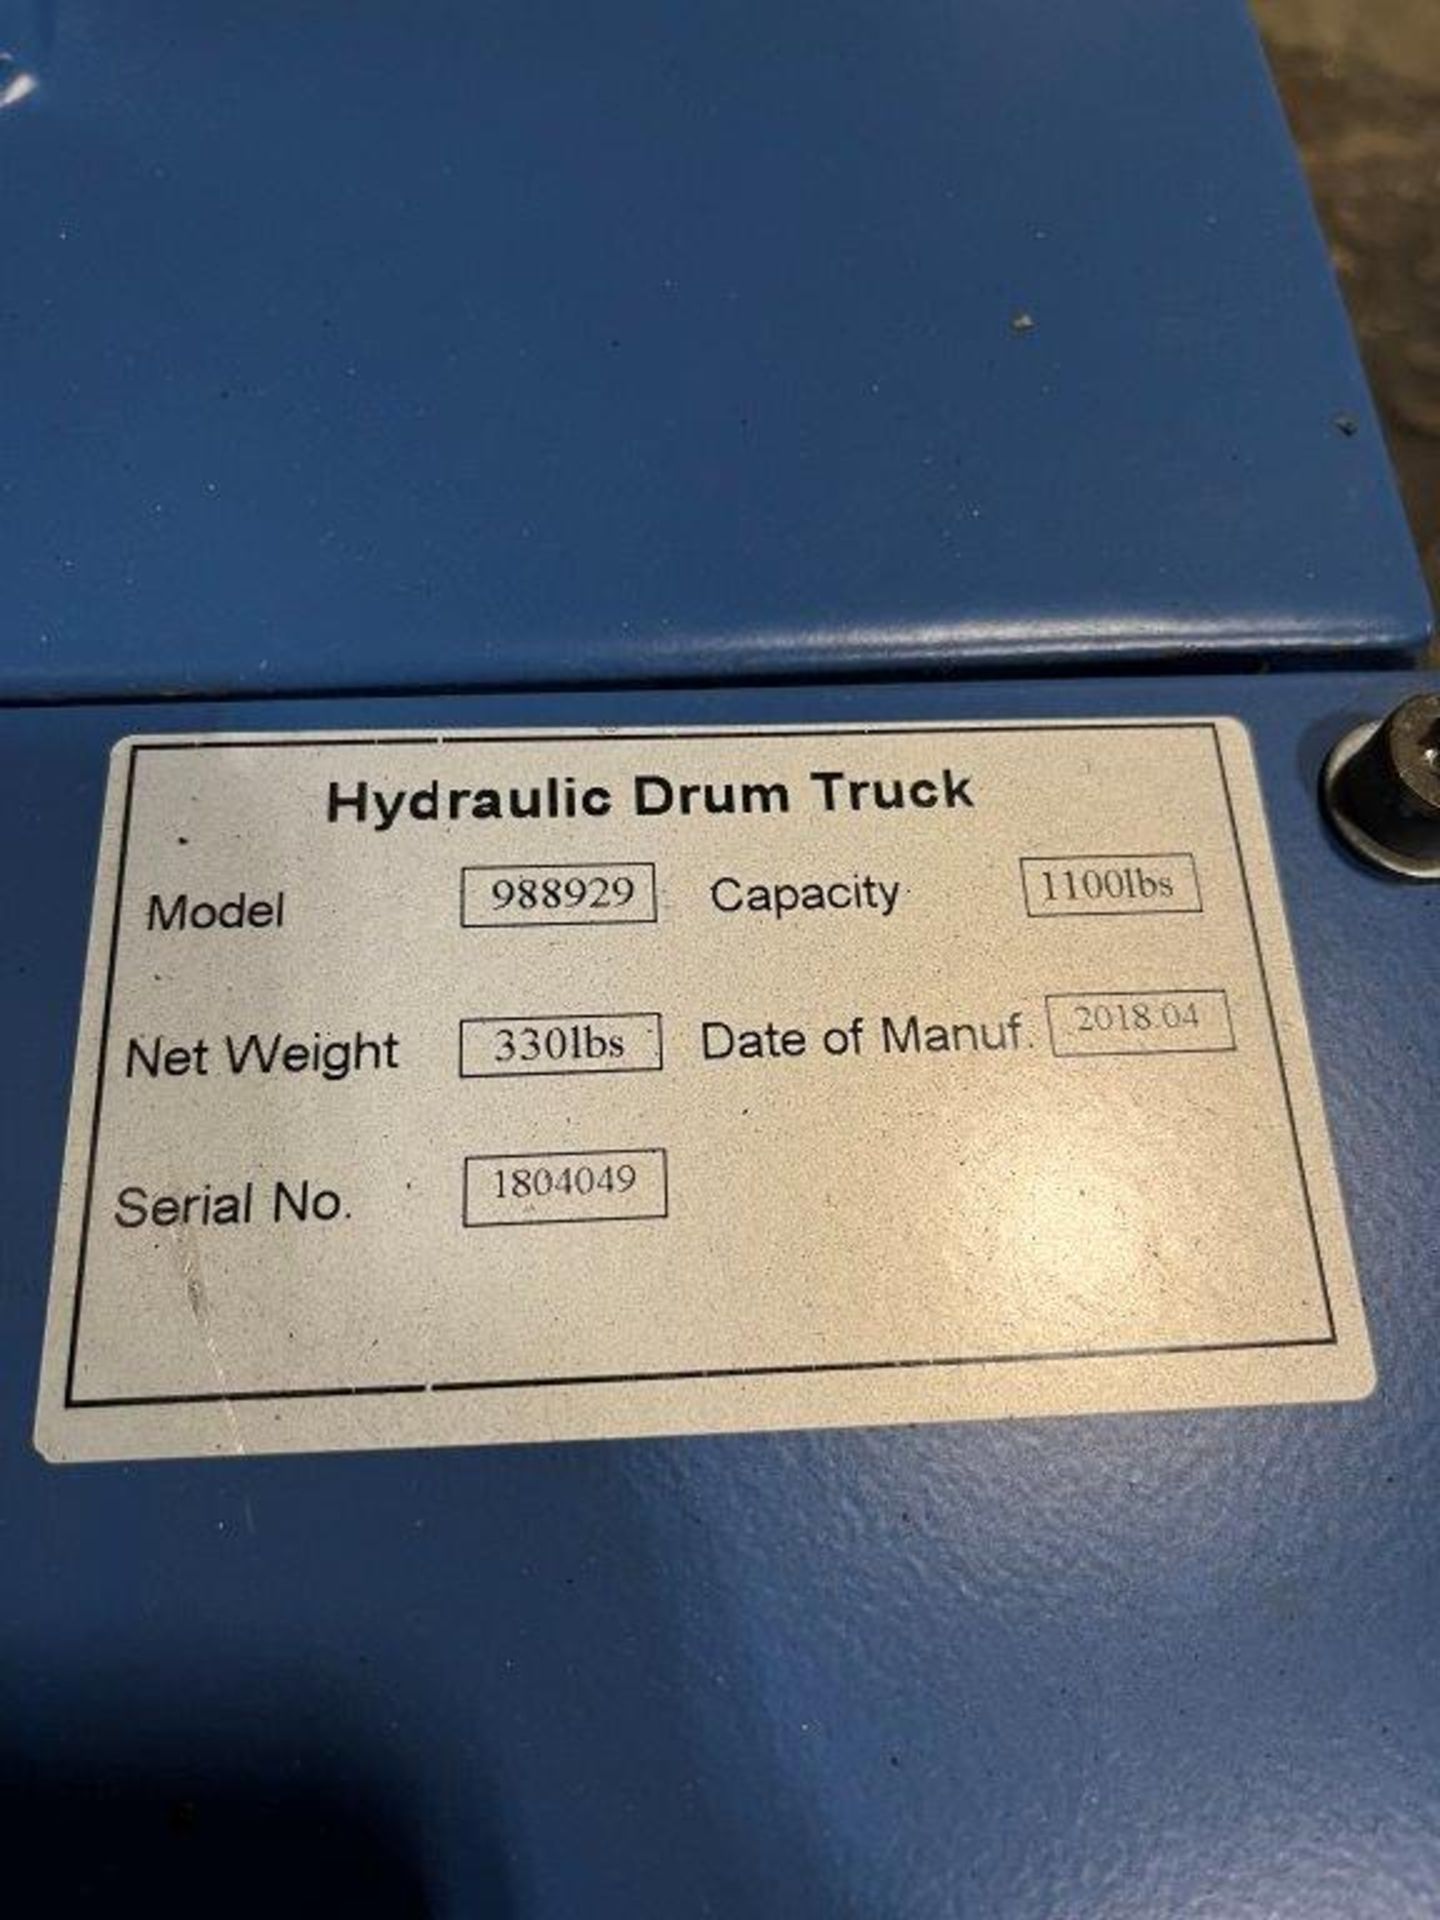 Global 988929 1,100-Lb Capacity Hydraulic Drum Truck - Image 3 of 3